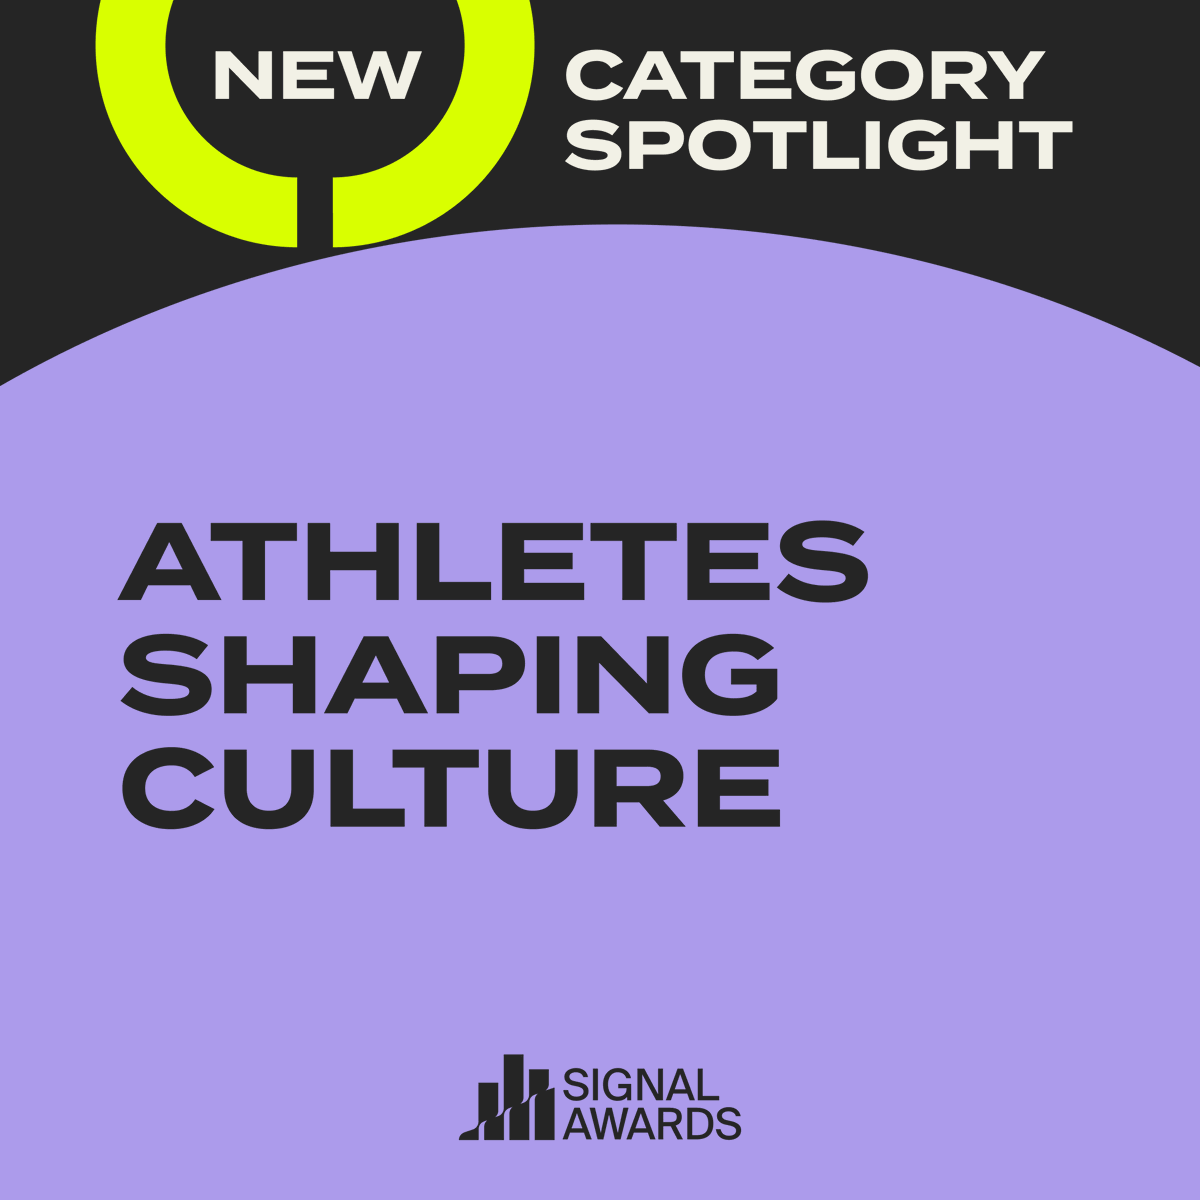 Our mission at The Signal Awards is to recognize podcasts that define culture, which is why we're introducing new categories like, Athletes Shaping Culture, Artists & Designers Shaping Culture, Comedians Shaping Culture and more. You can find more here: signalaward.com